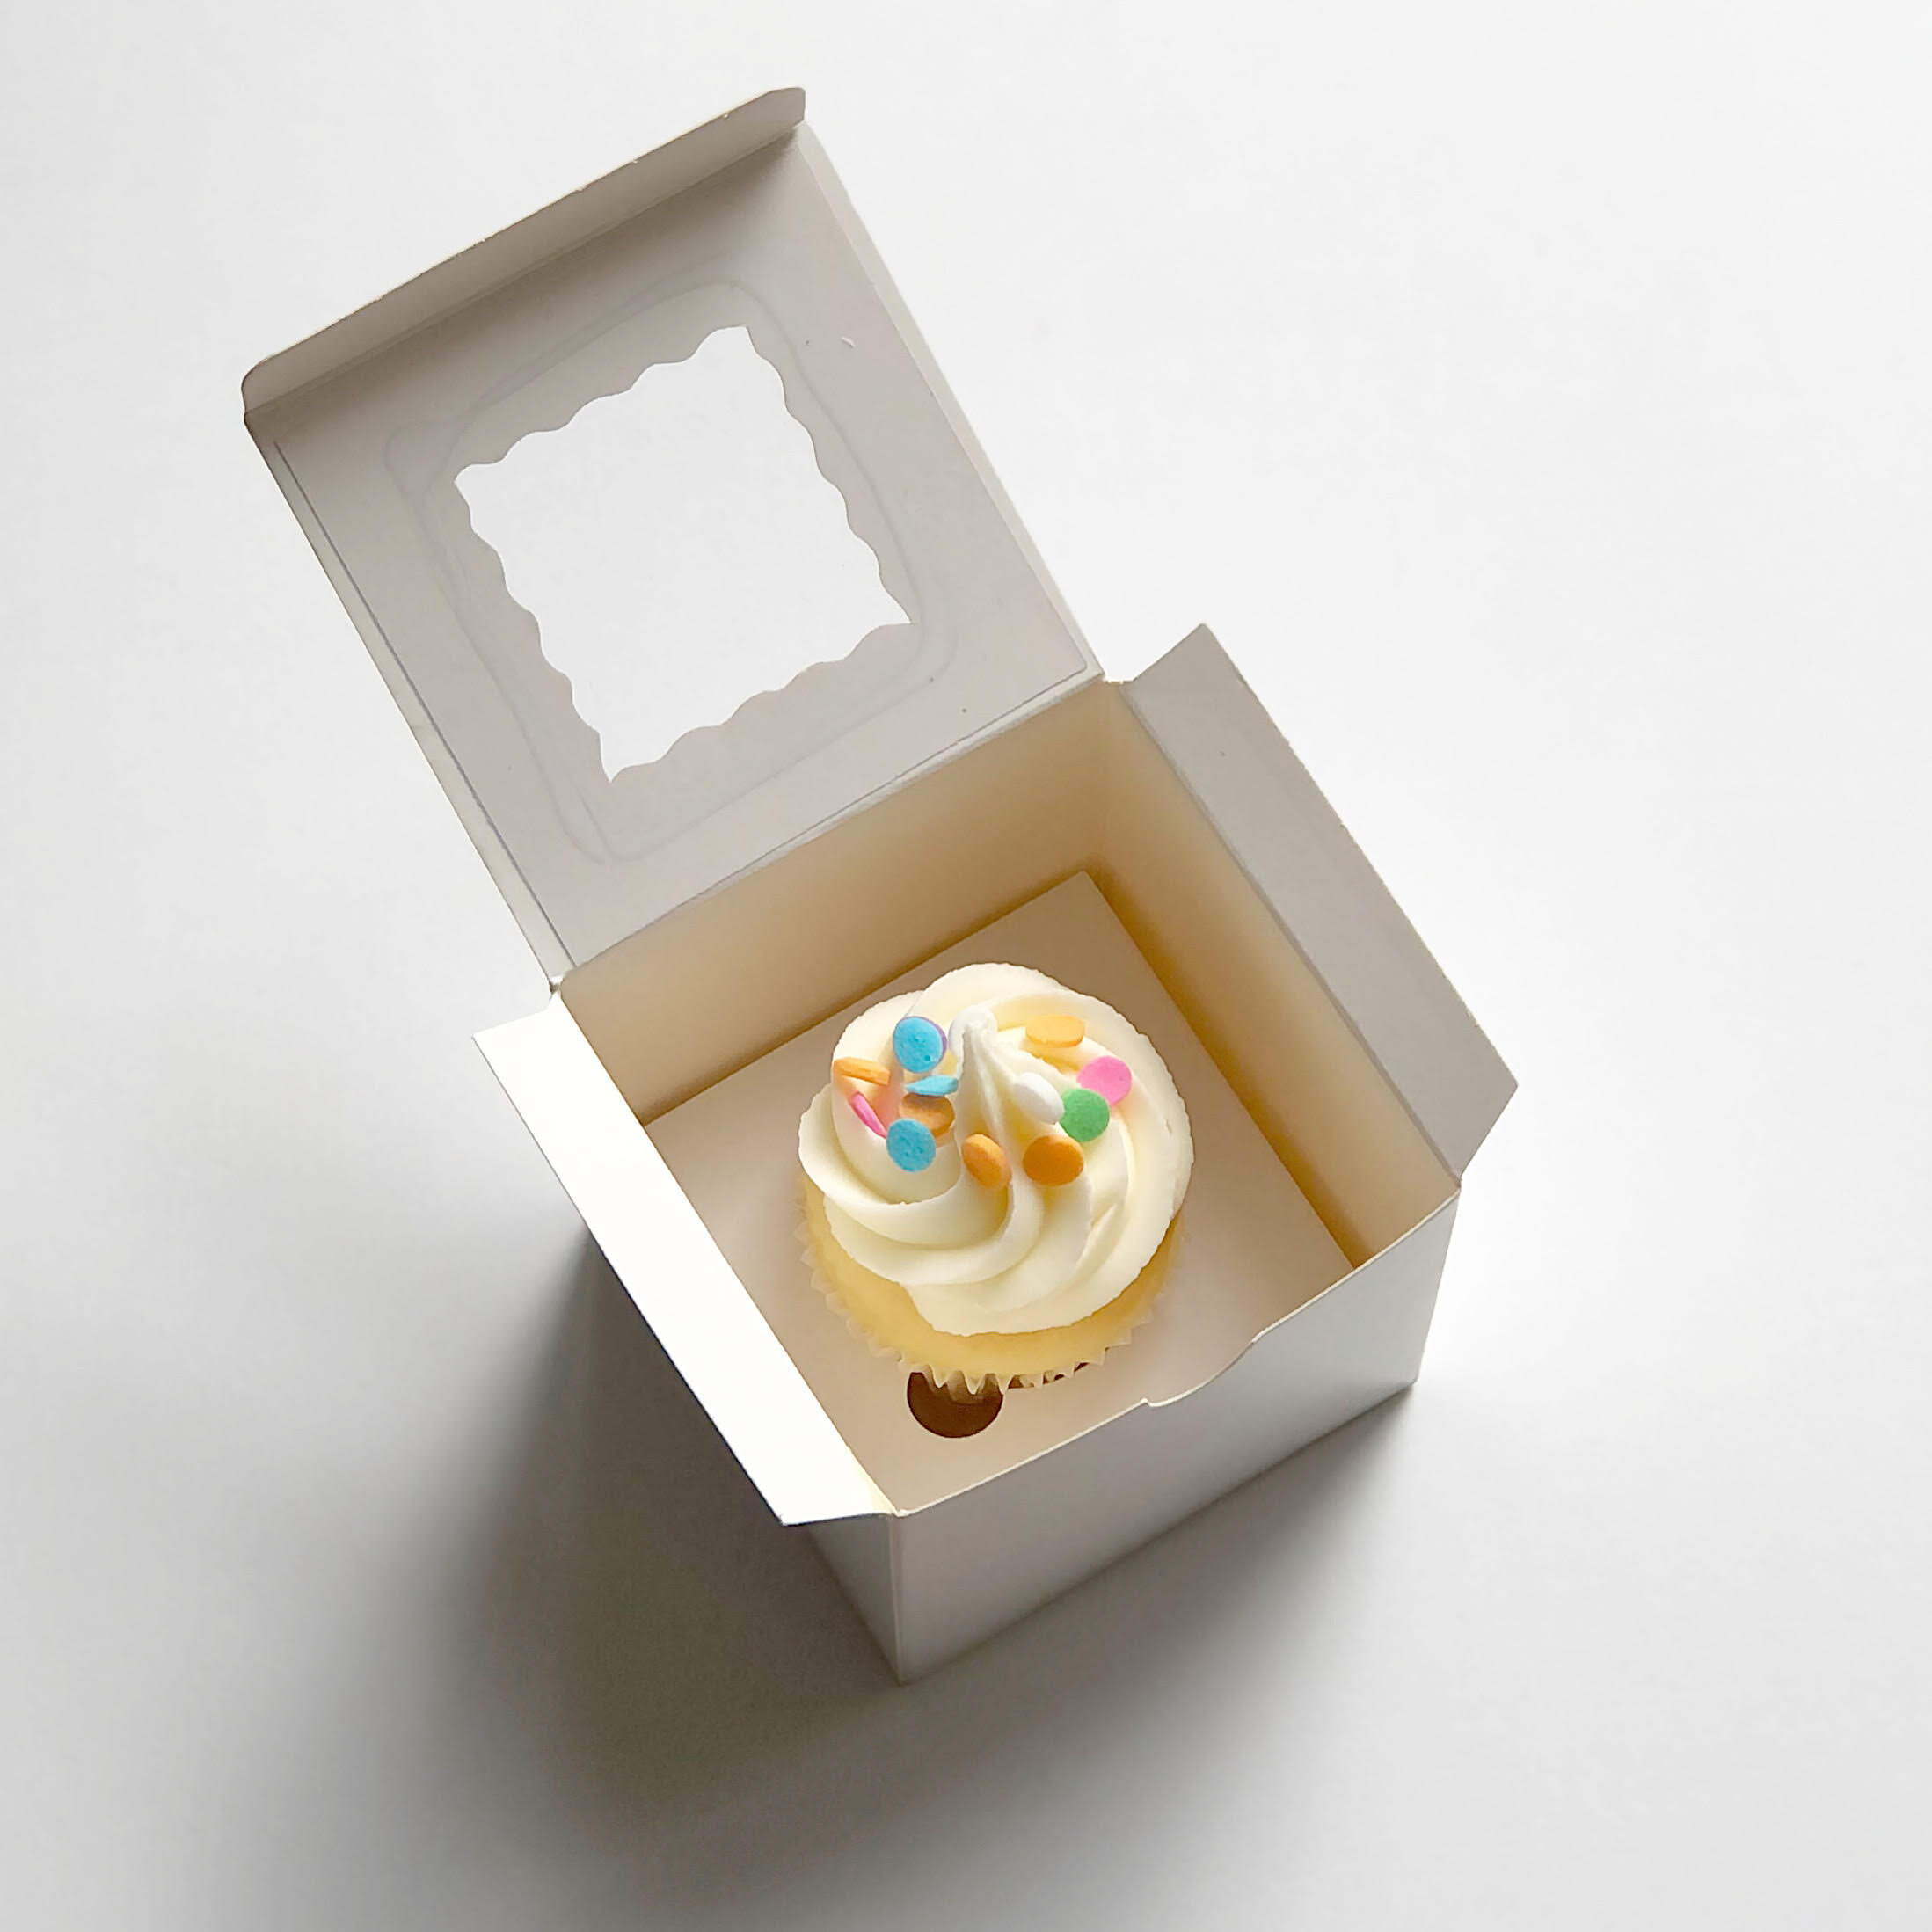 Bakewell's Cake Boxes 10 x Cupcake Boxes 4 Hole Flower Pattern Design Cake  Box Holder with Window Display Removable Insert holds Four Cupcakes Muffins  (10pcs) : Amazon.co.uk: Home & Kitchen